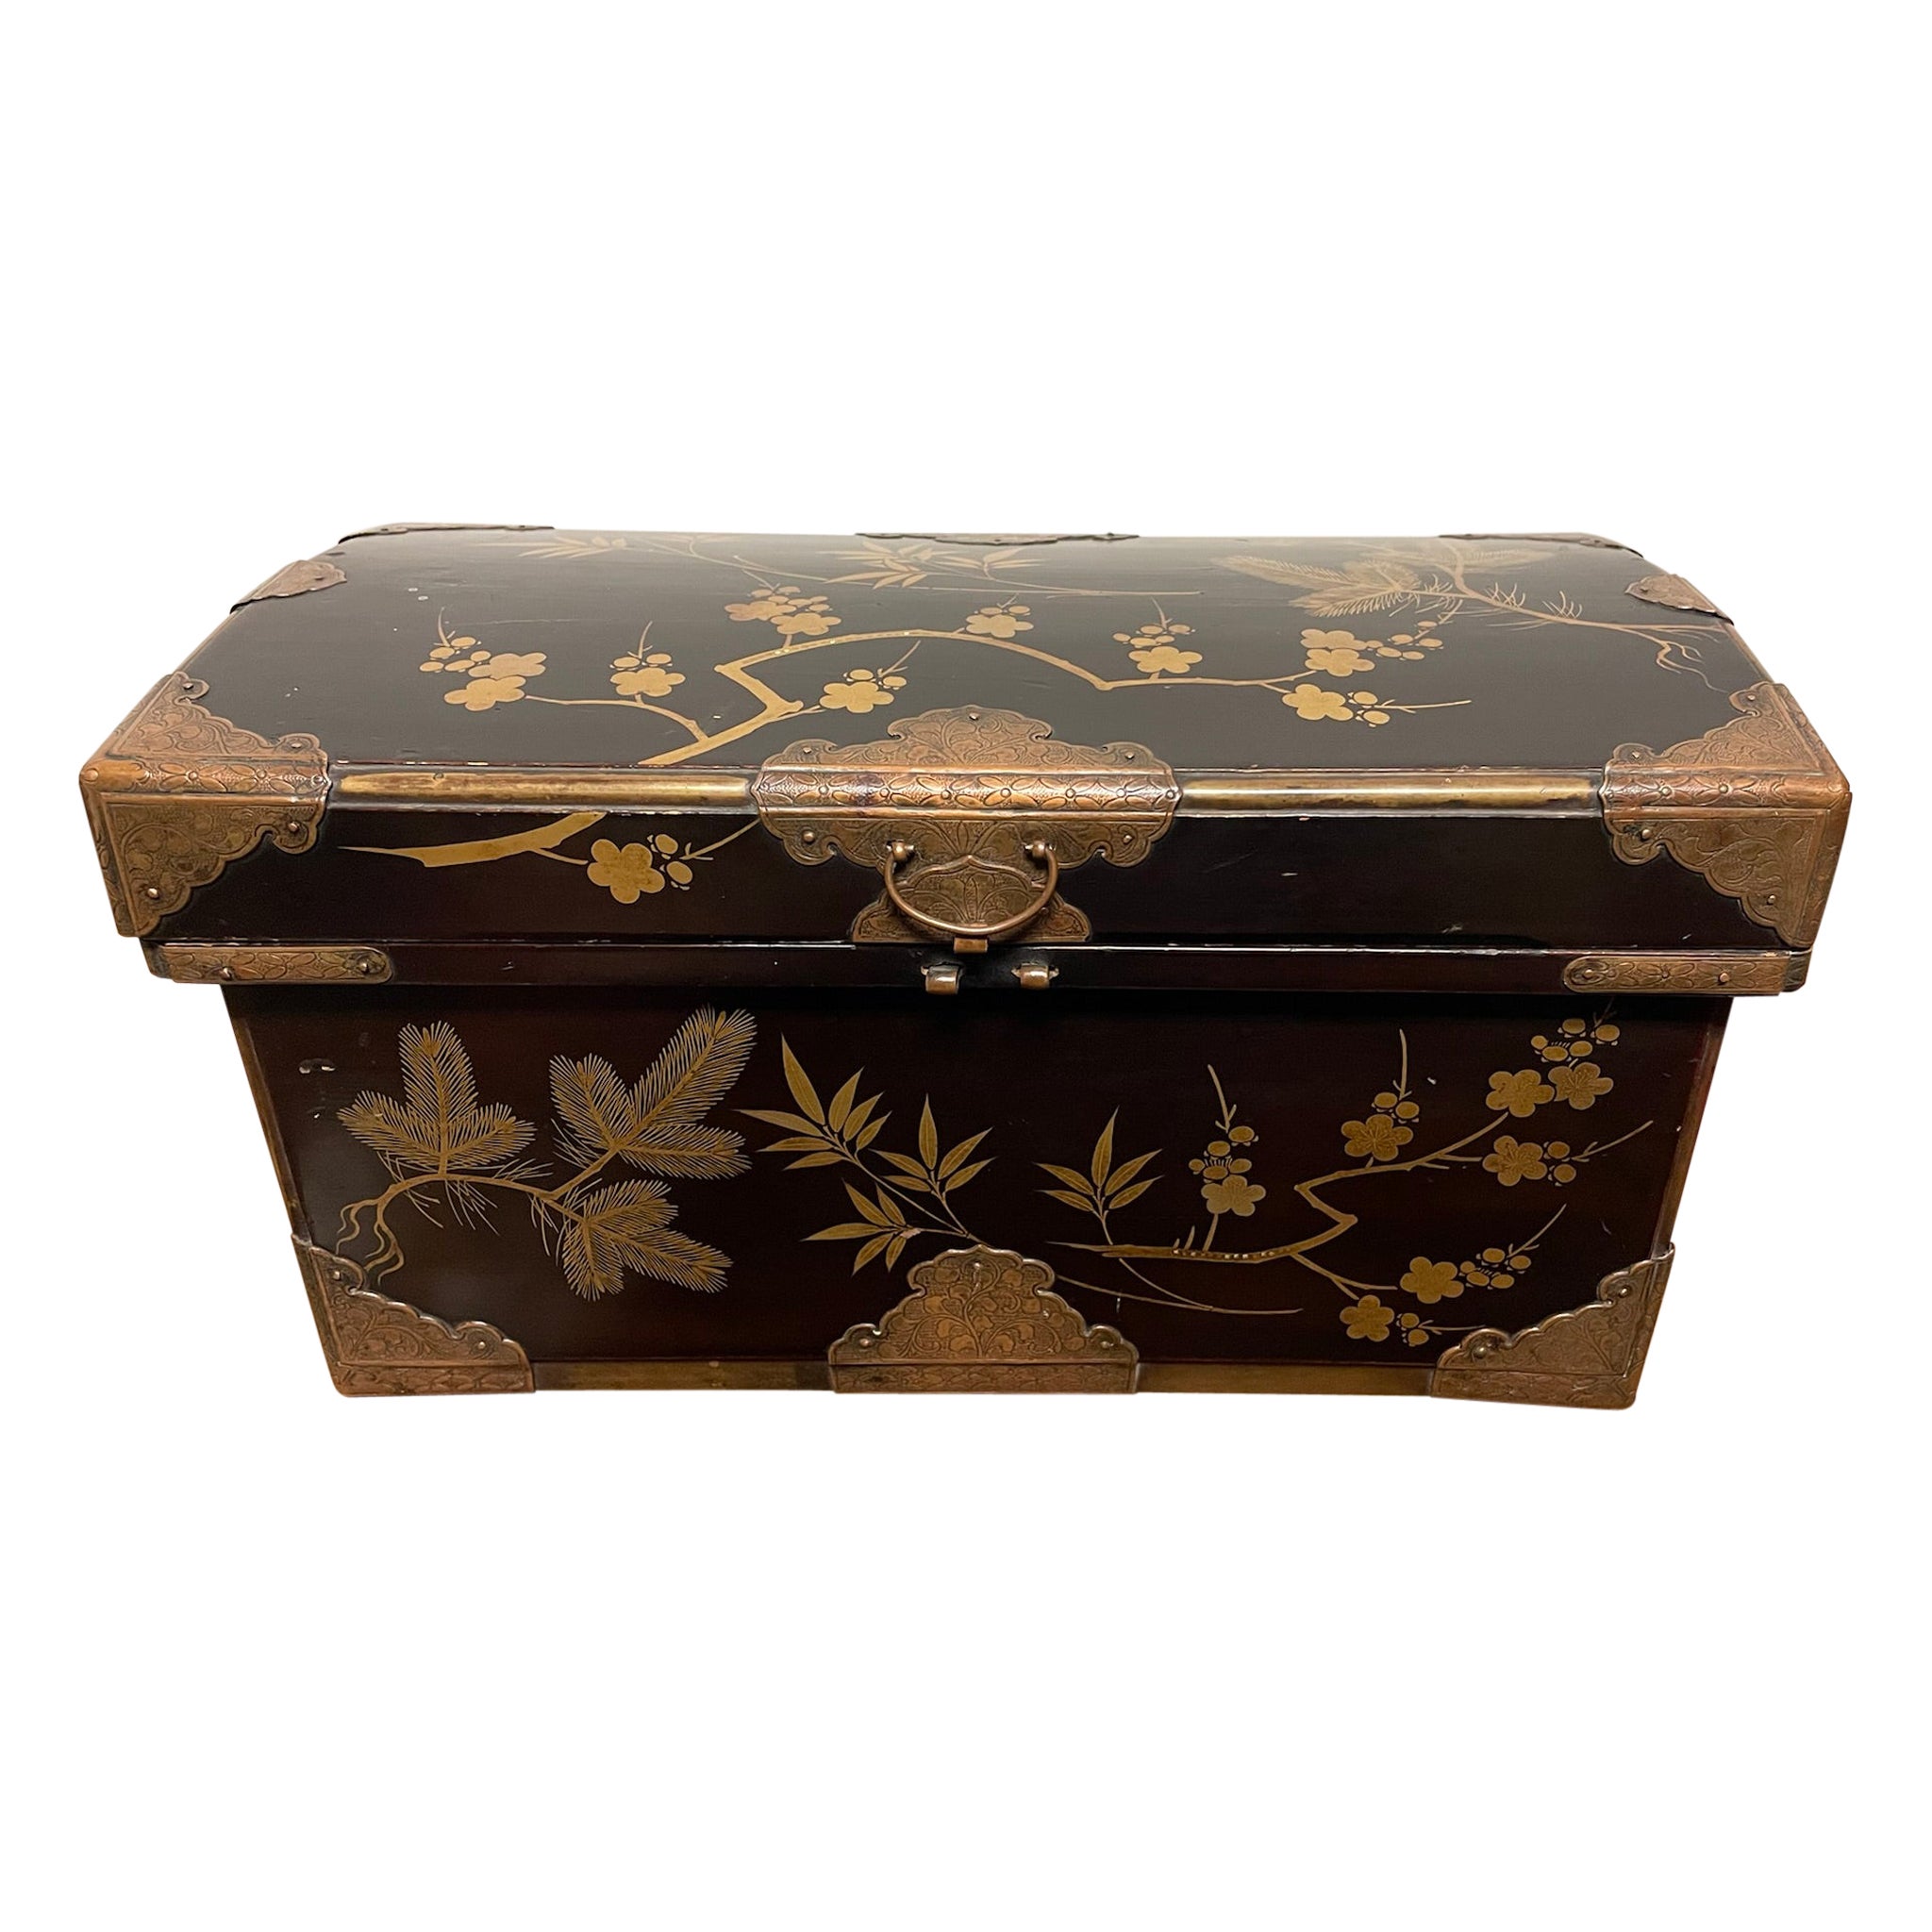 19th Century Japanese Plum Lacquer and Gilt Box with Etched Copper Mounts